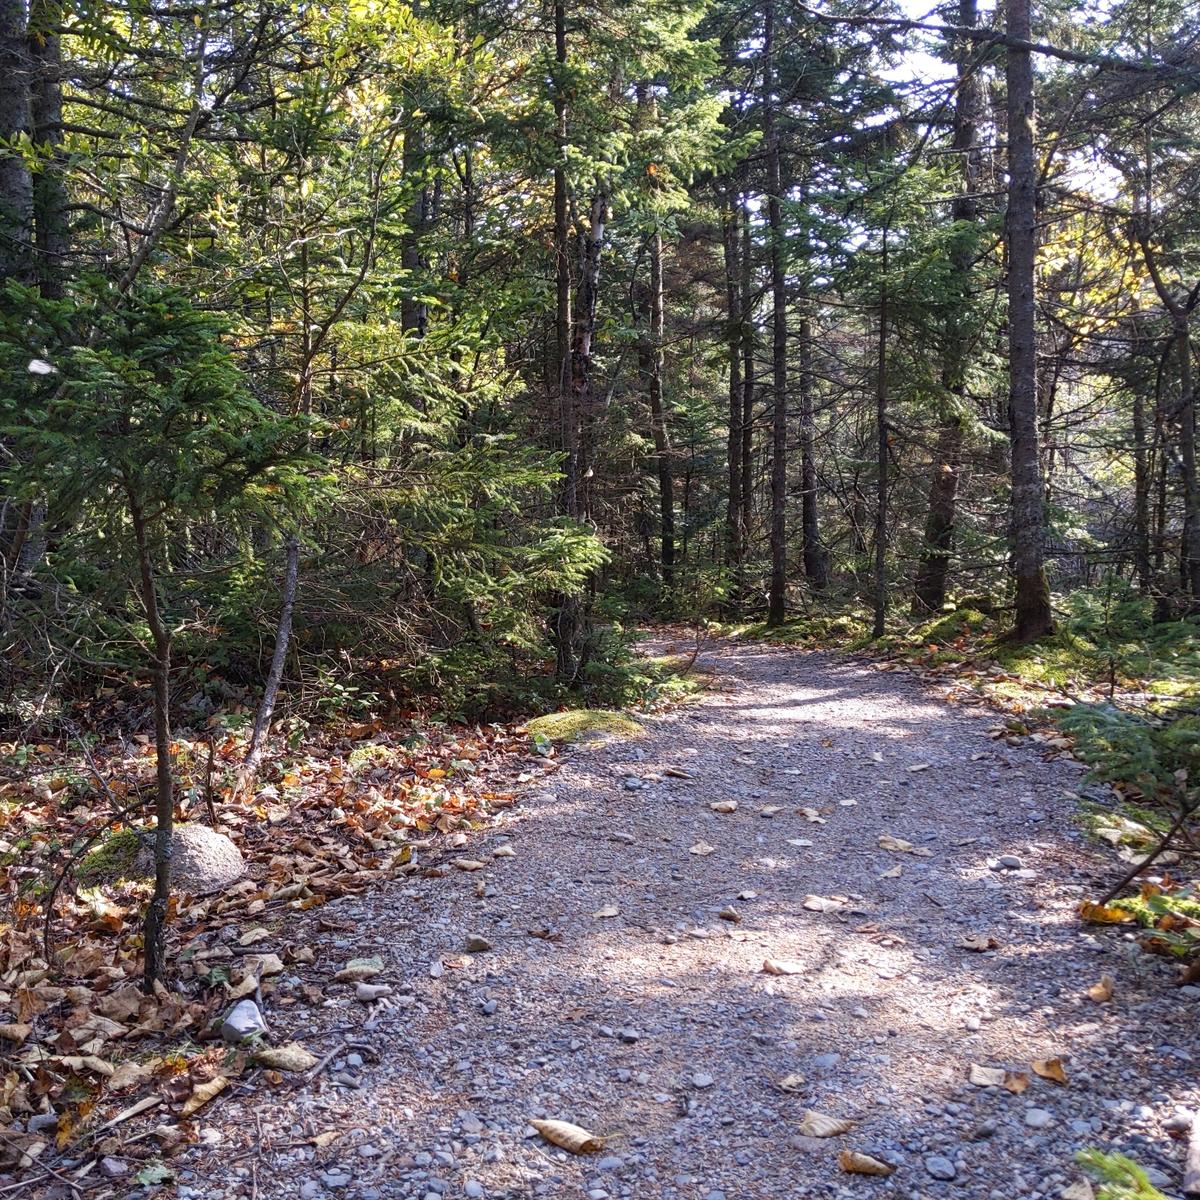 A gravel path through the woods